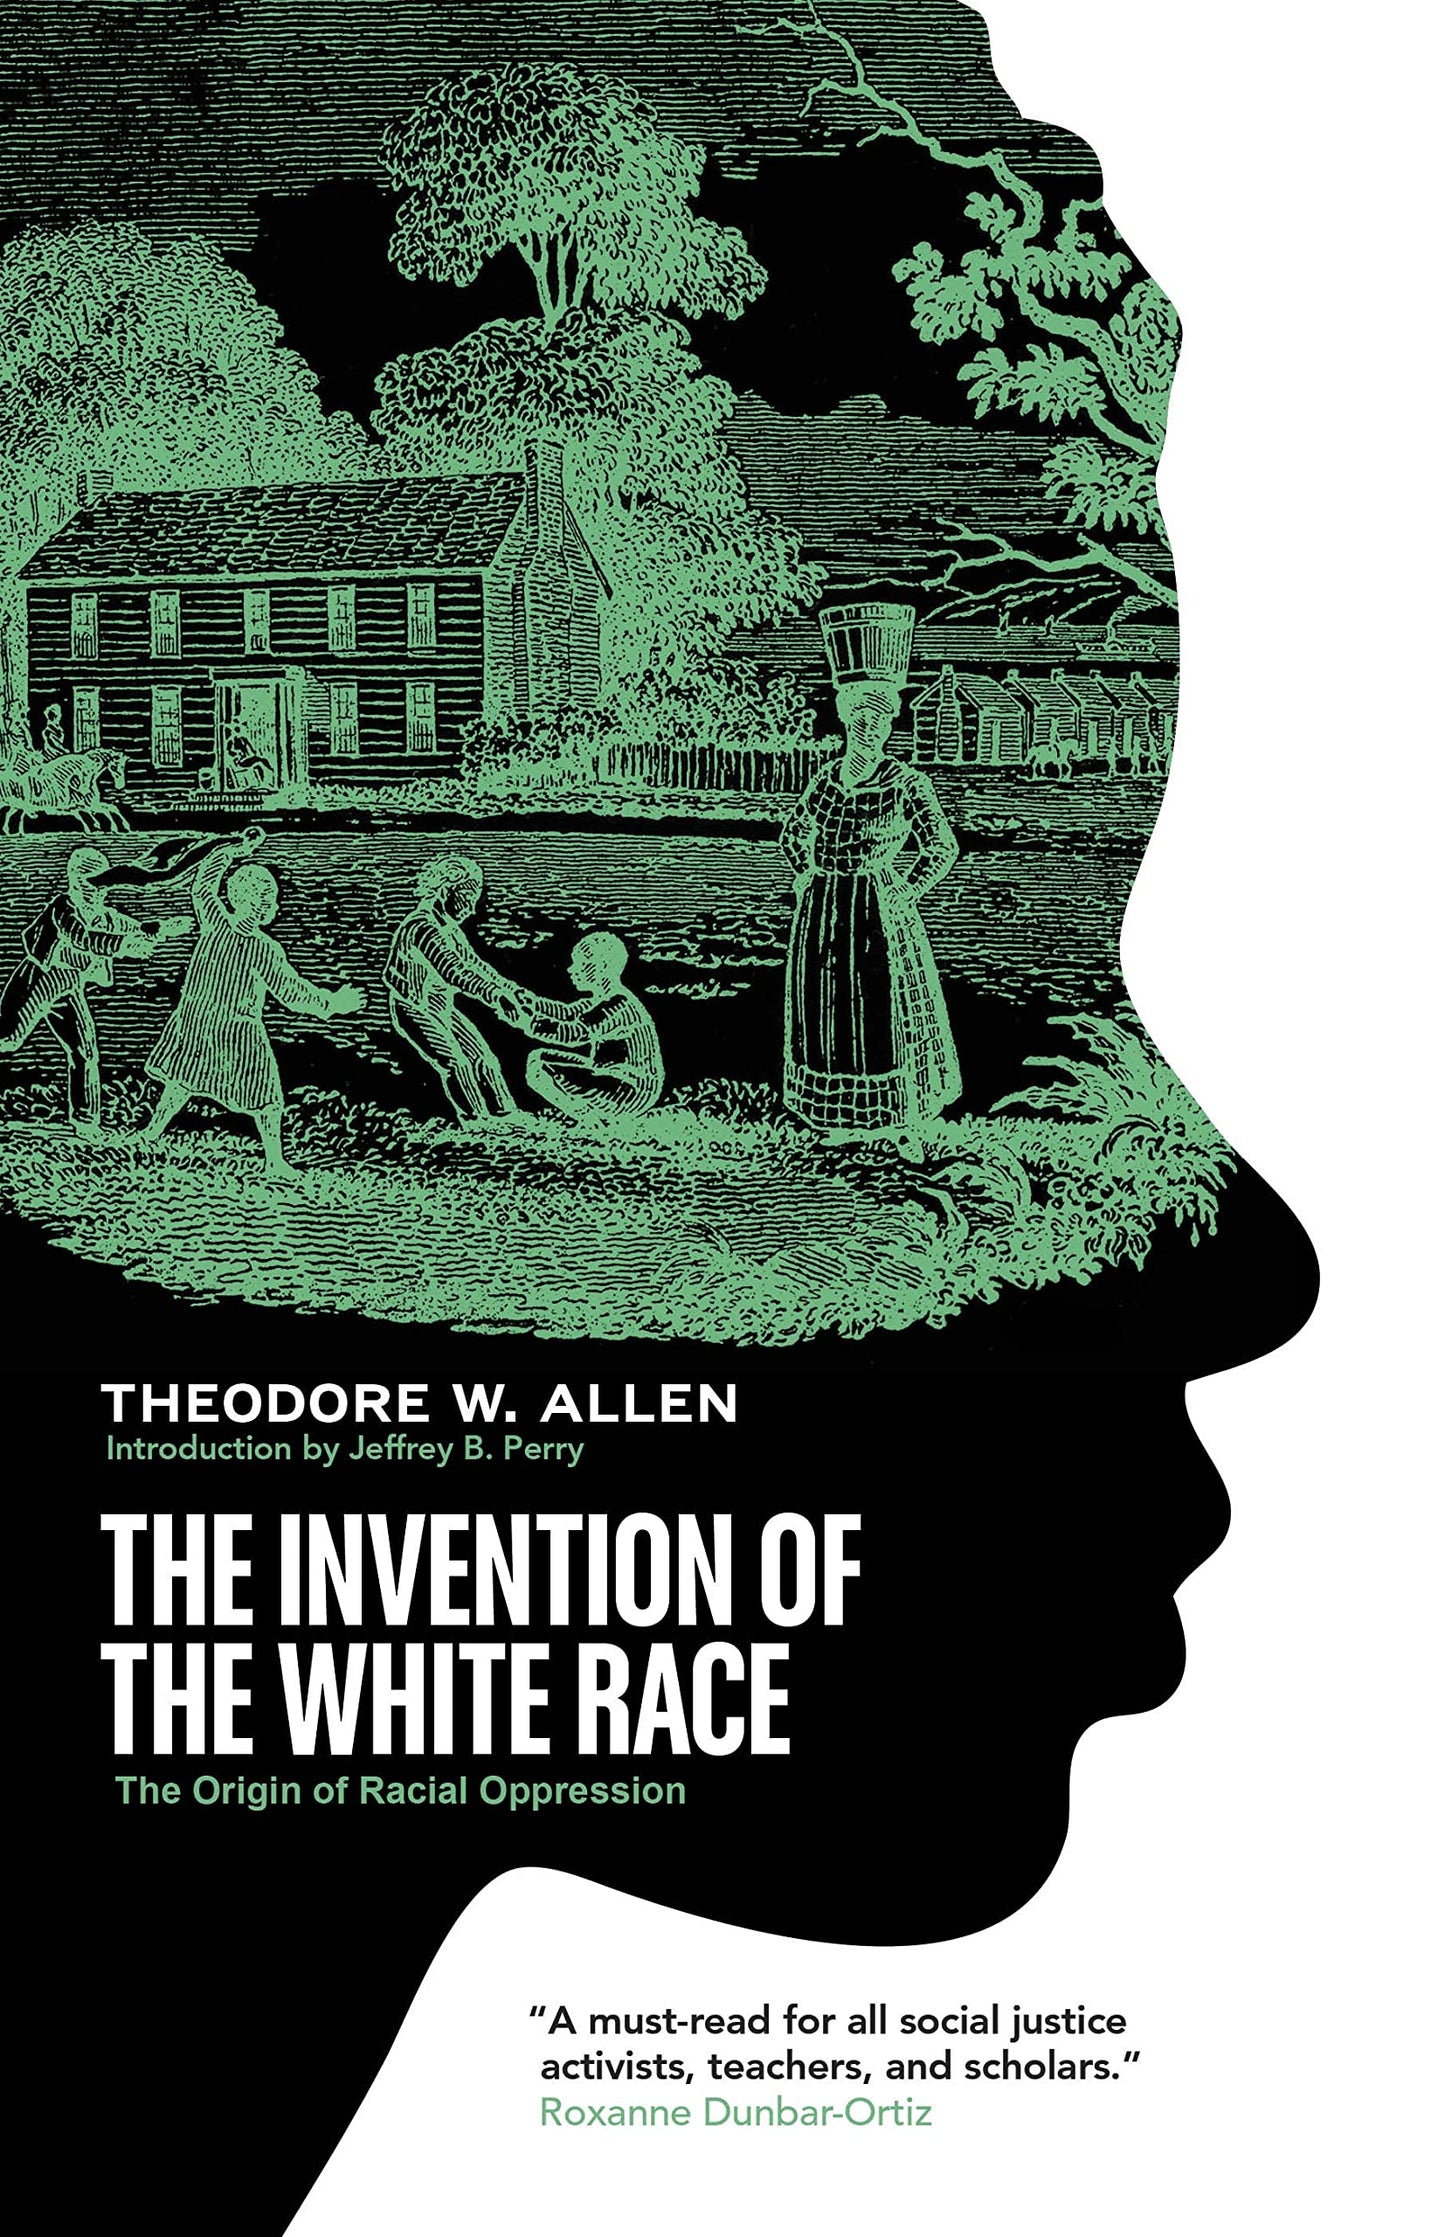 The Invention of the White Race, by Theodore W. Allen